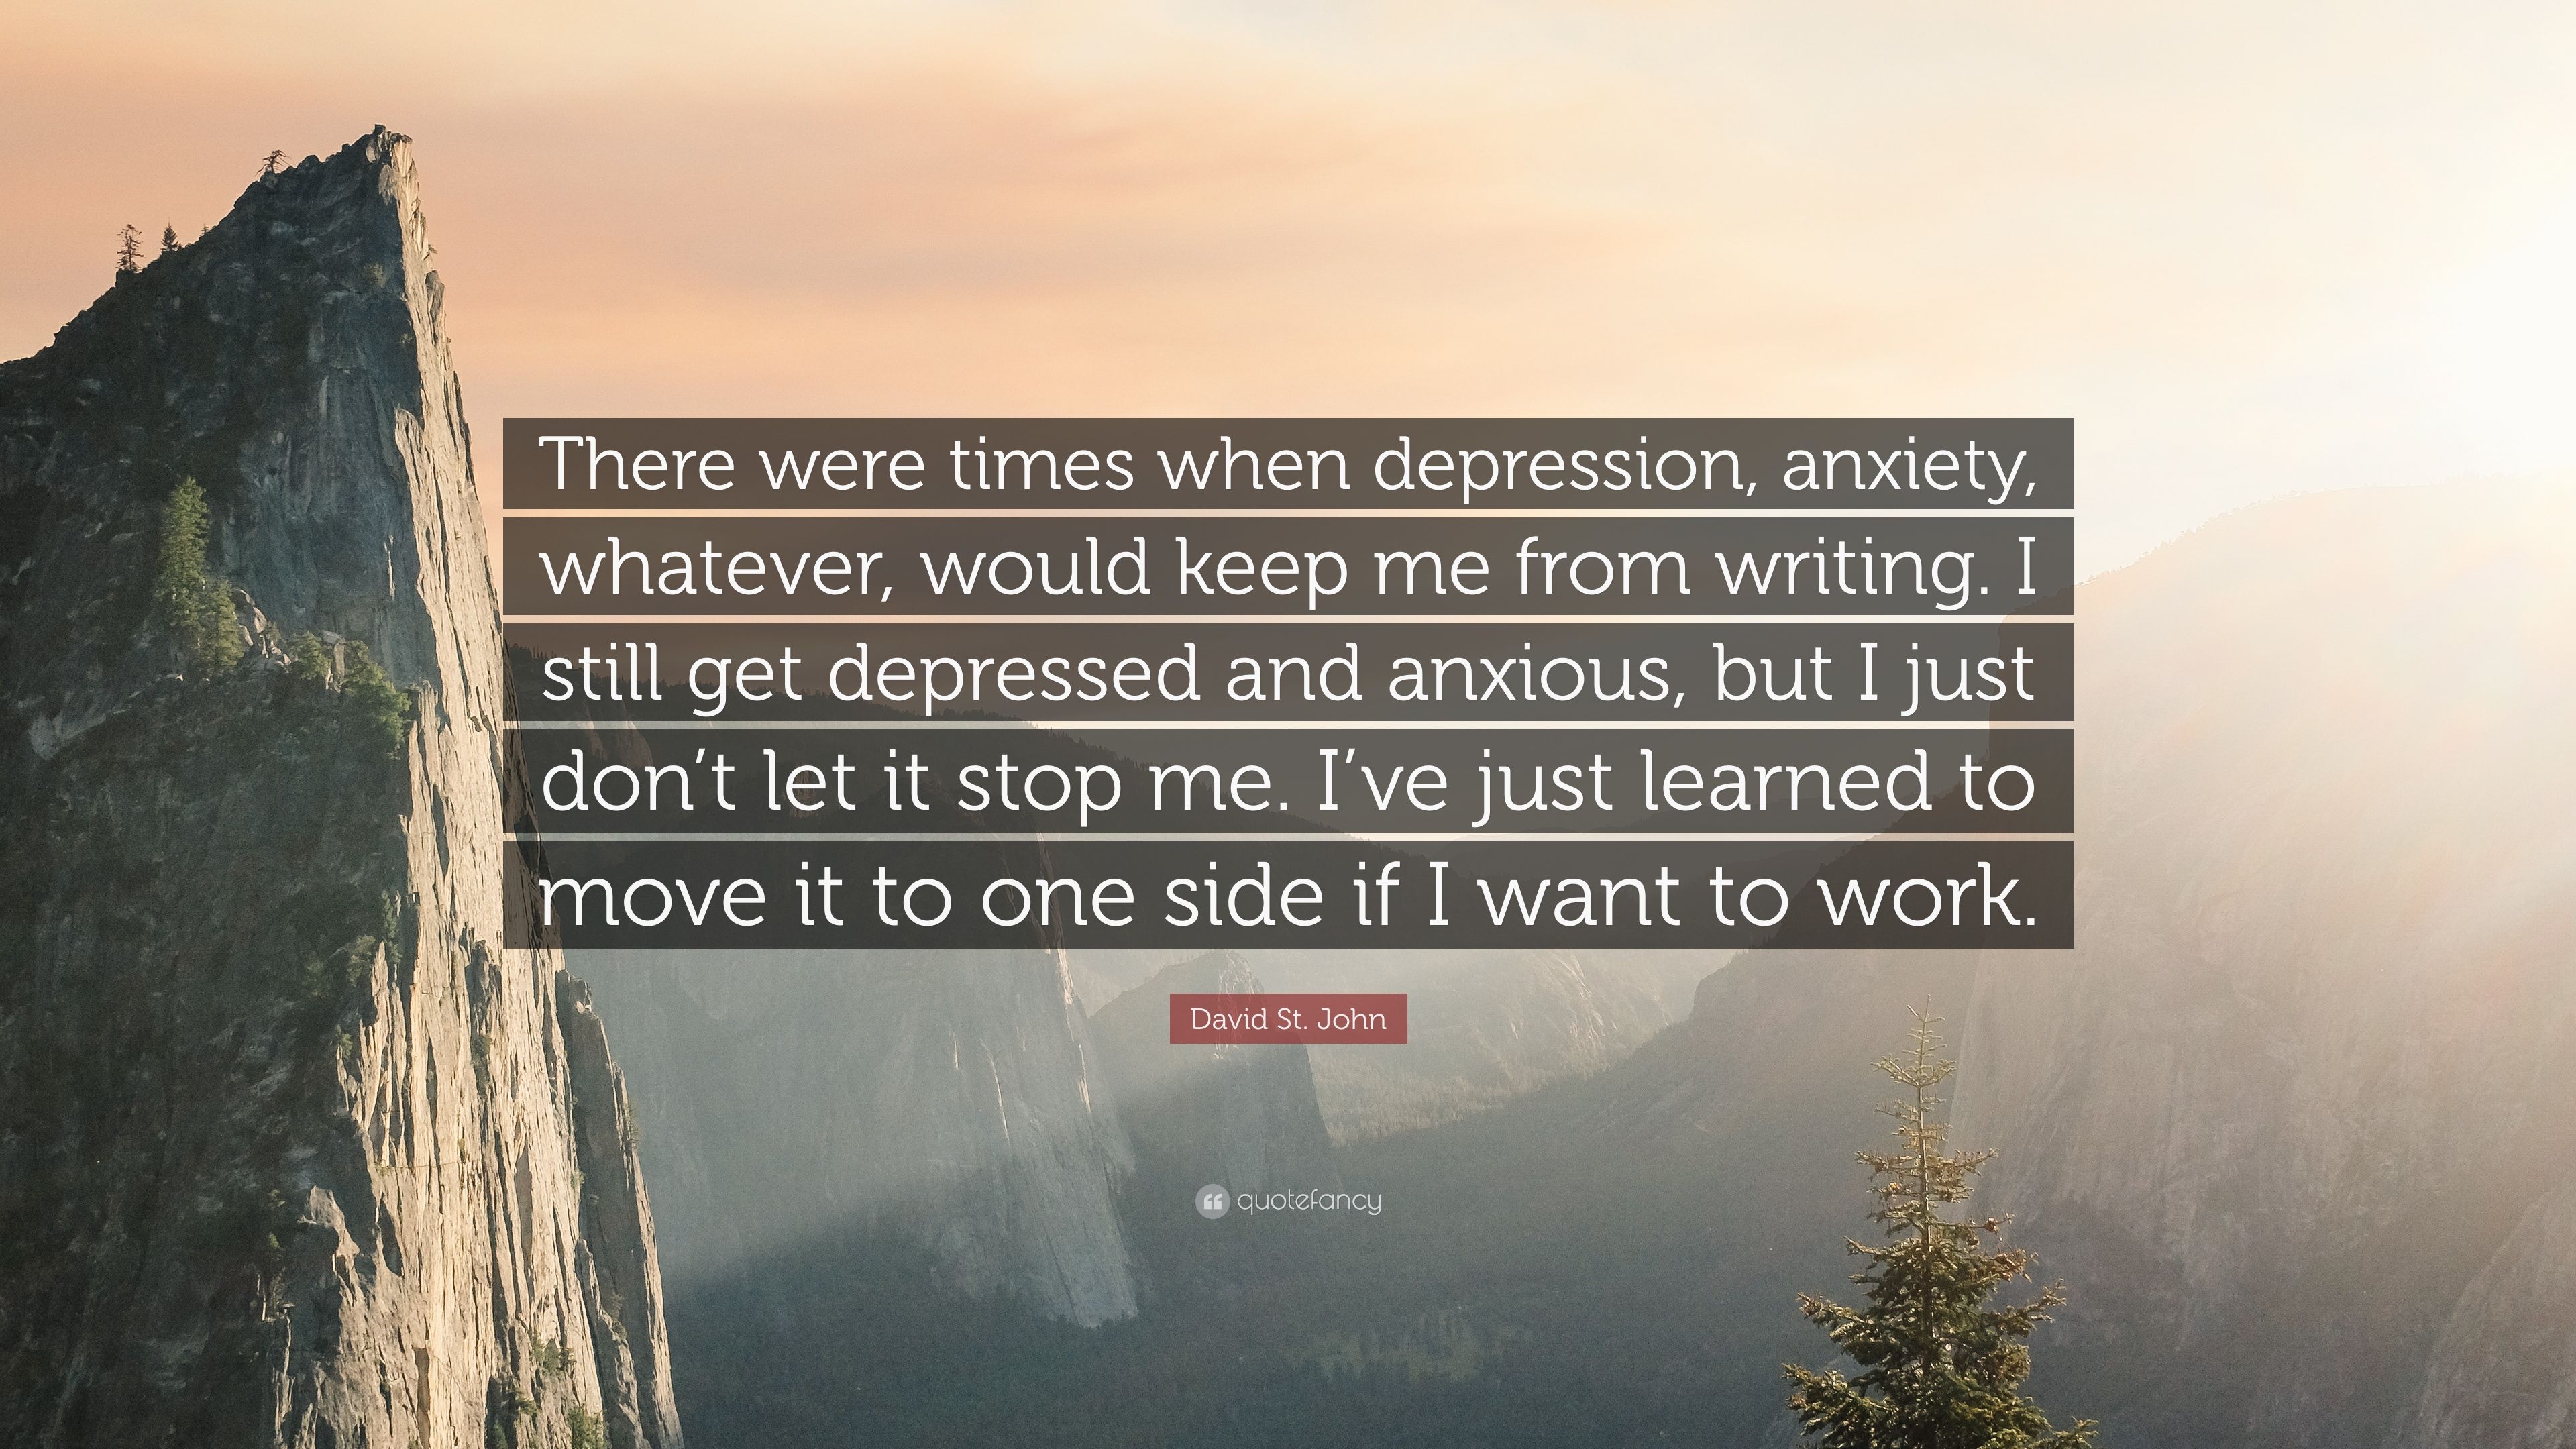 David St. John Quote: “There were times when depression, anxiety, whatever, would keep me from writing. I still get depressed and anxious, but .” (7 wallpaper)